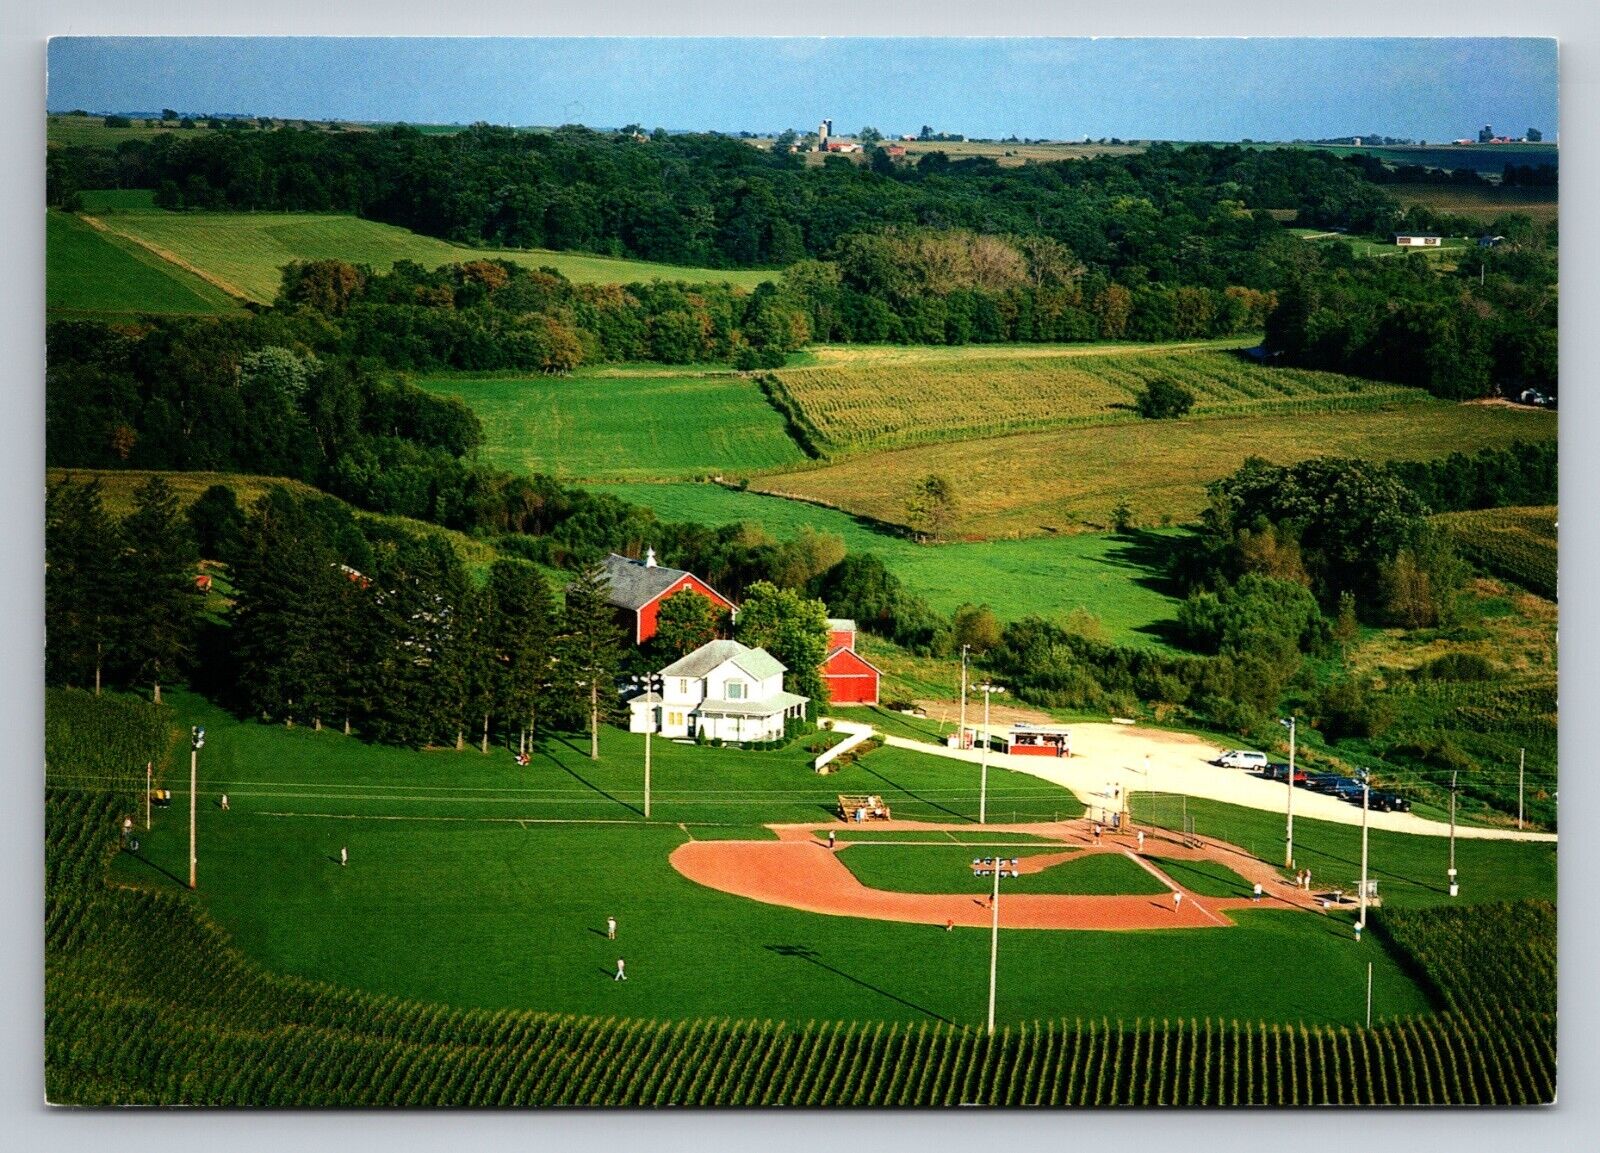 Baseball Aerial View Field Of Dreams Movie Site Dyersville Iowa Vintage Unposted